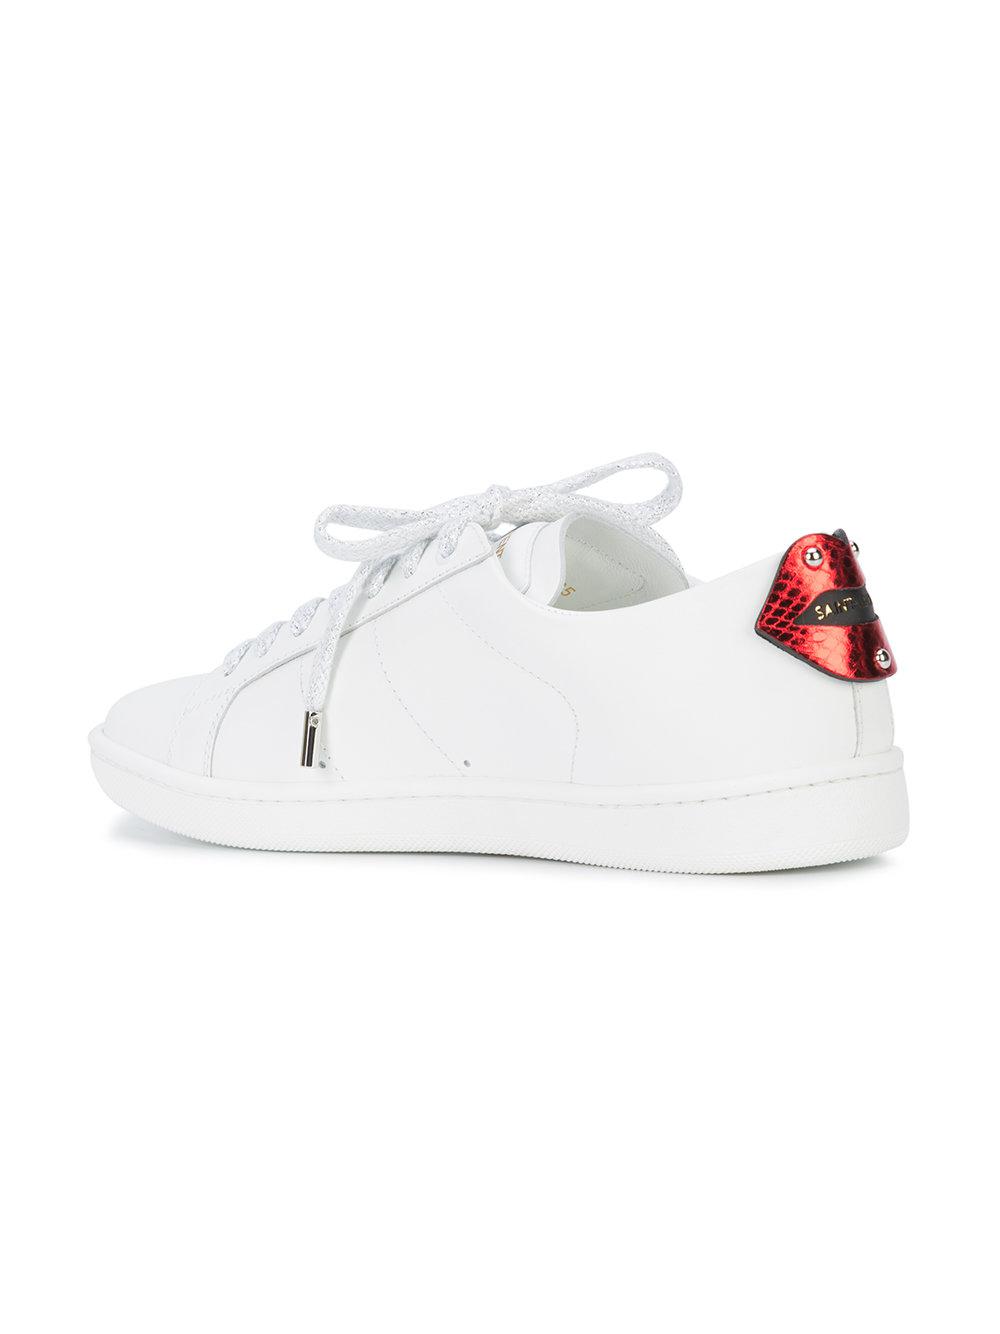 Download Saint Laurent Leather Court Classic Lips Sneakers in White ...